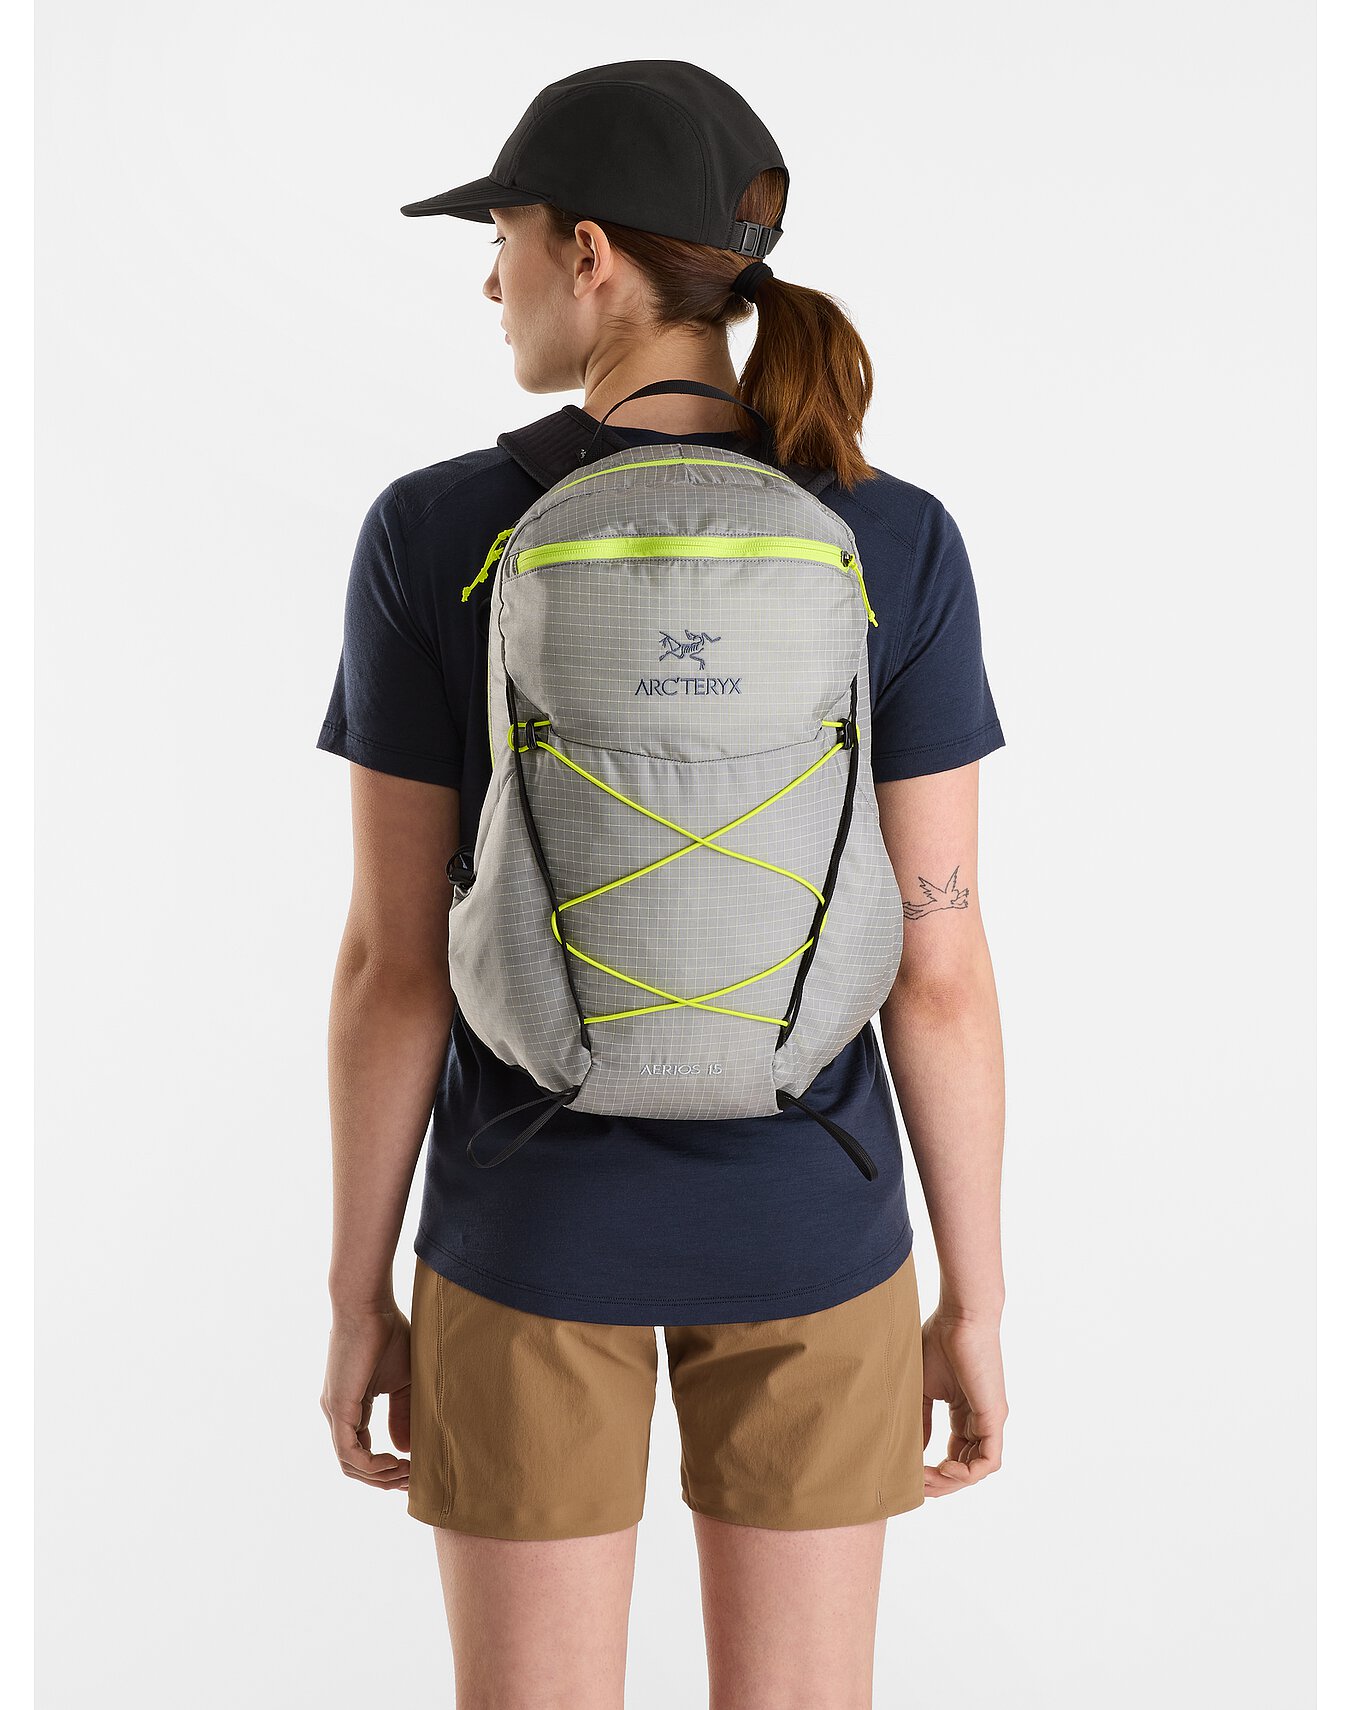 Aerios 15 Backpack Women's | Arc'teryx Outlet